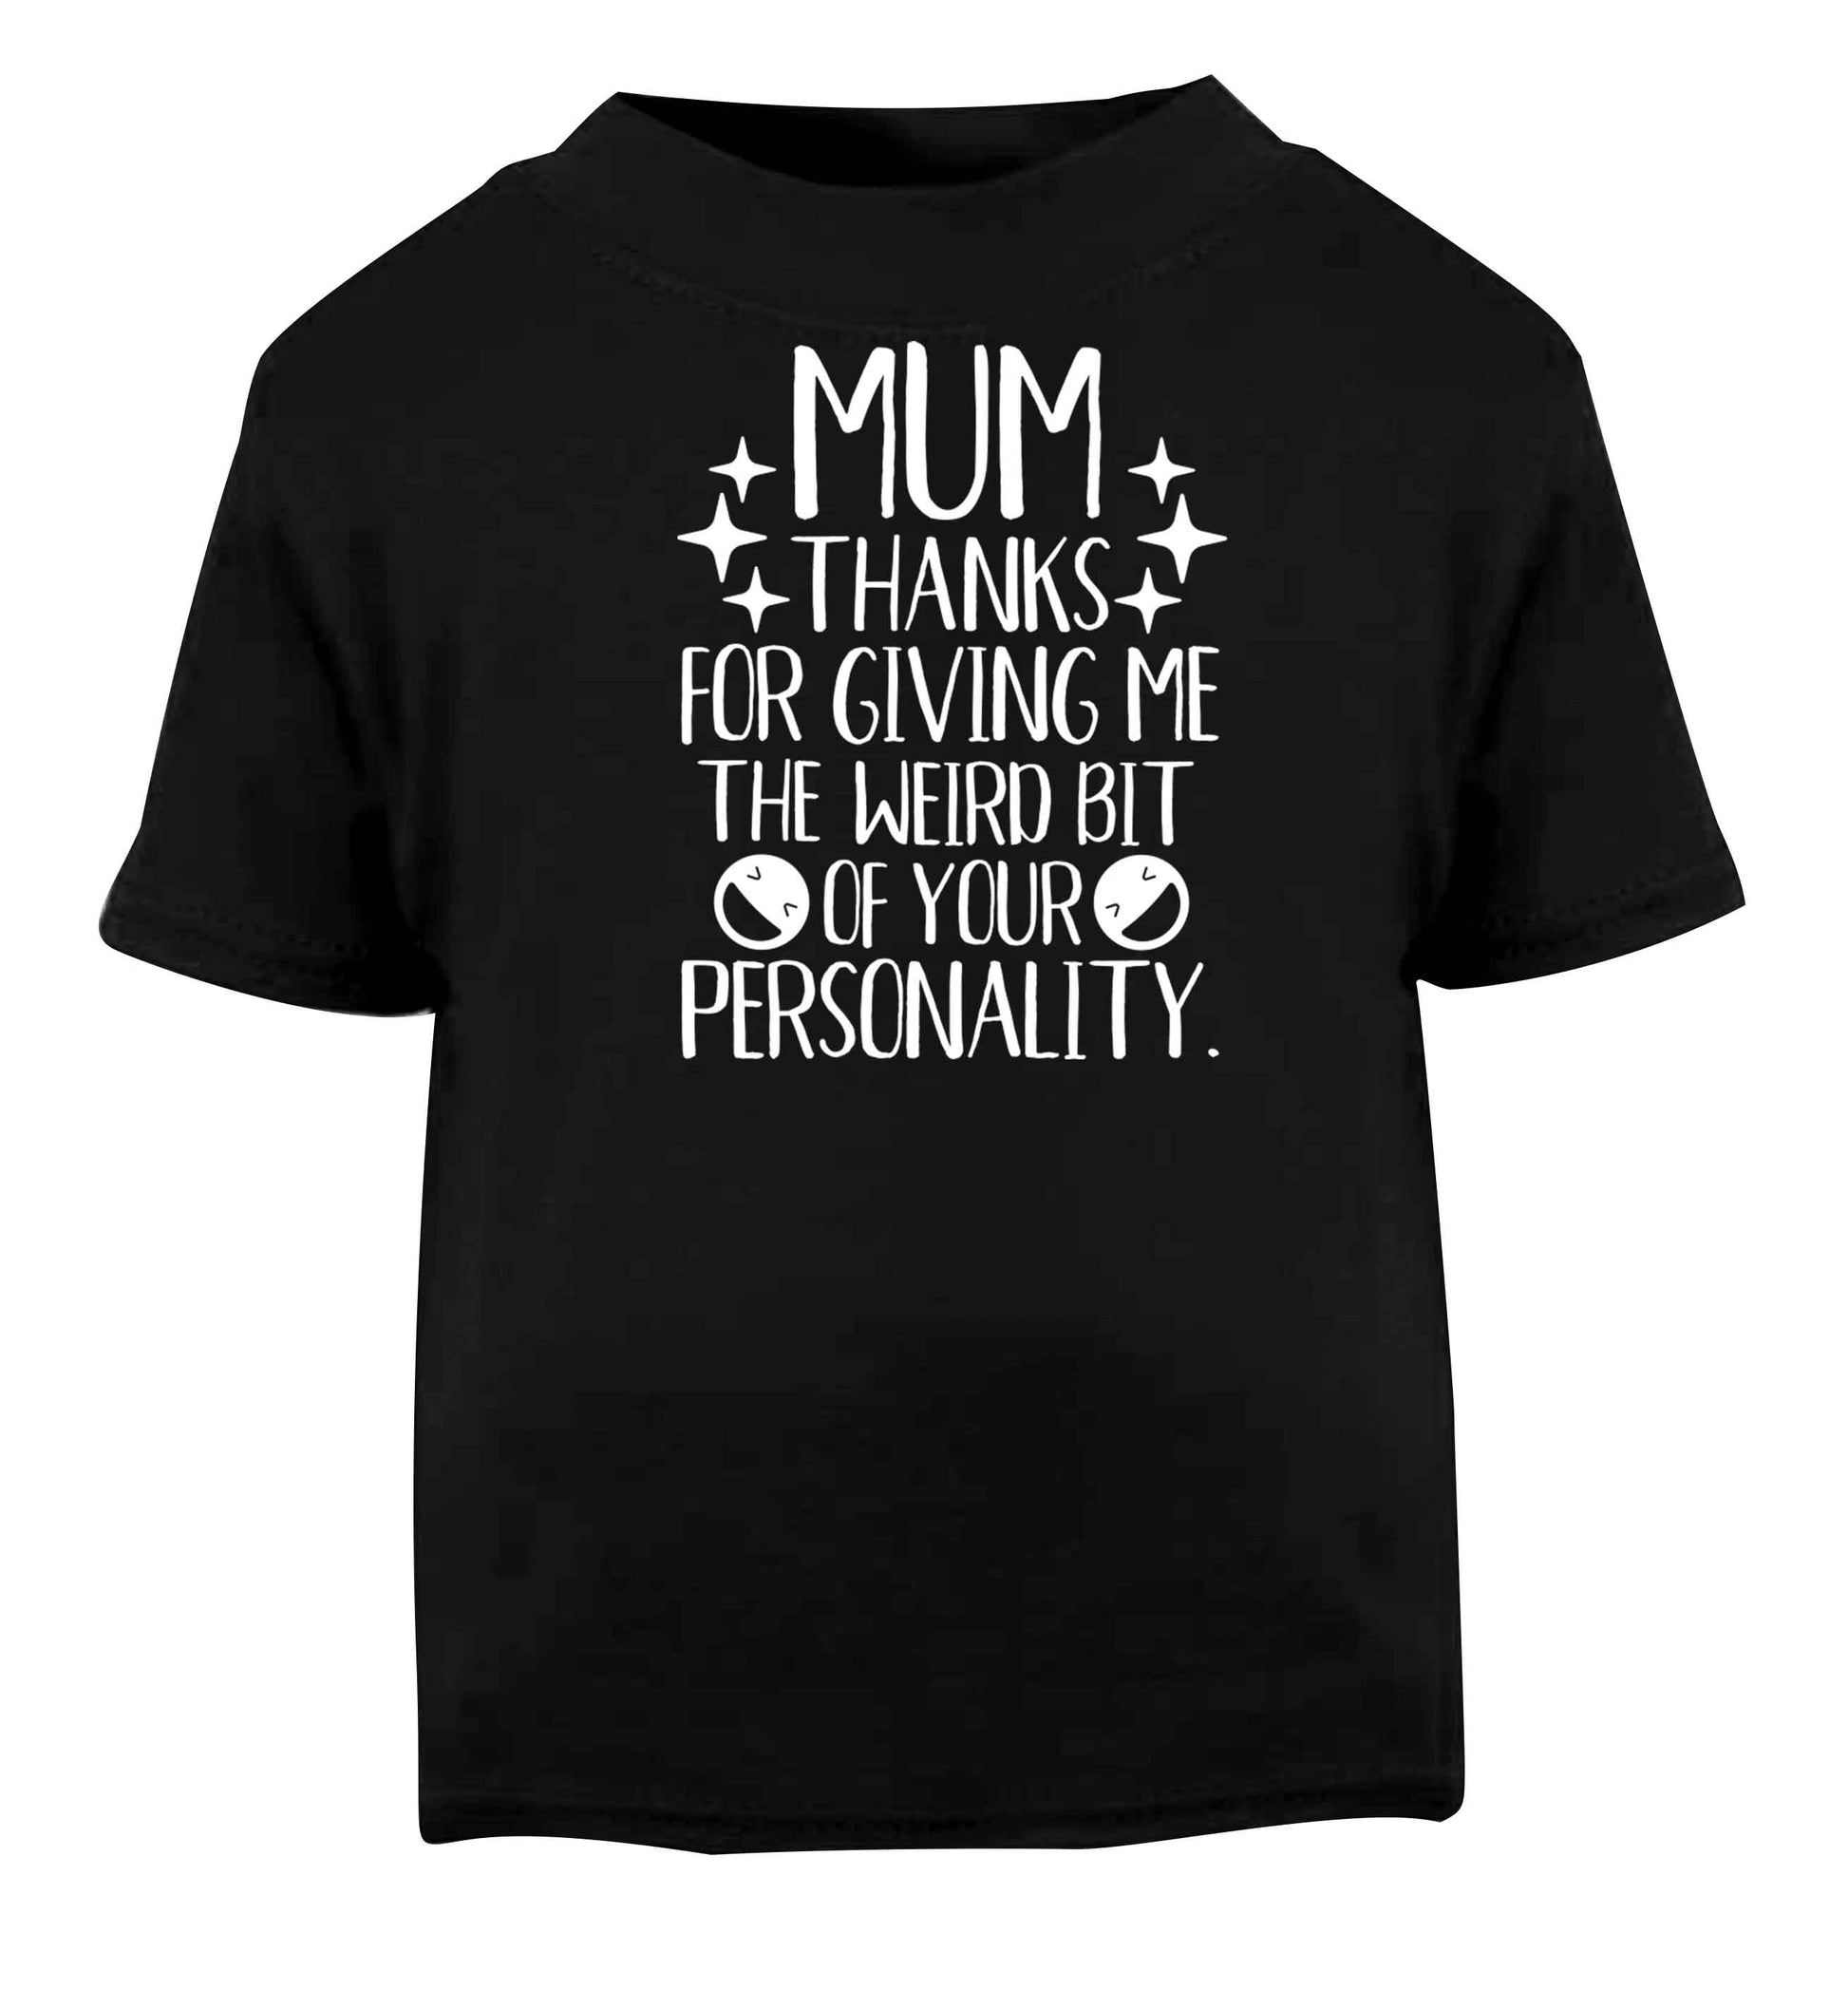 Mum thanks for giving me the weird bit of your personality Black baby toddler Tshirt 2 years